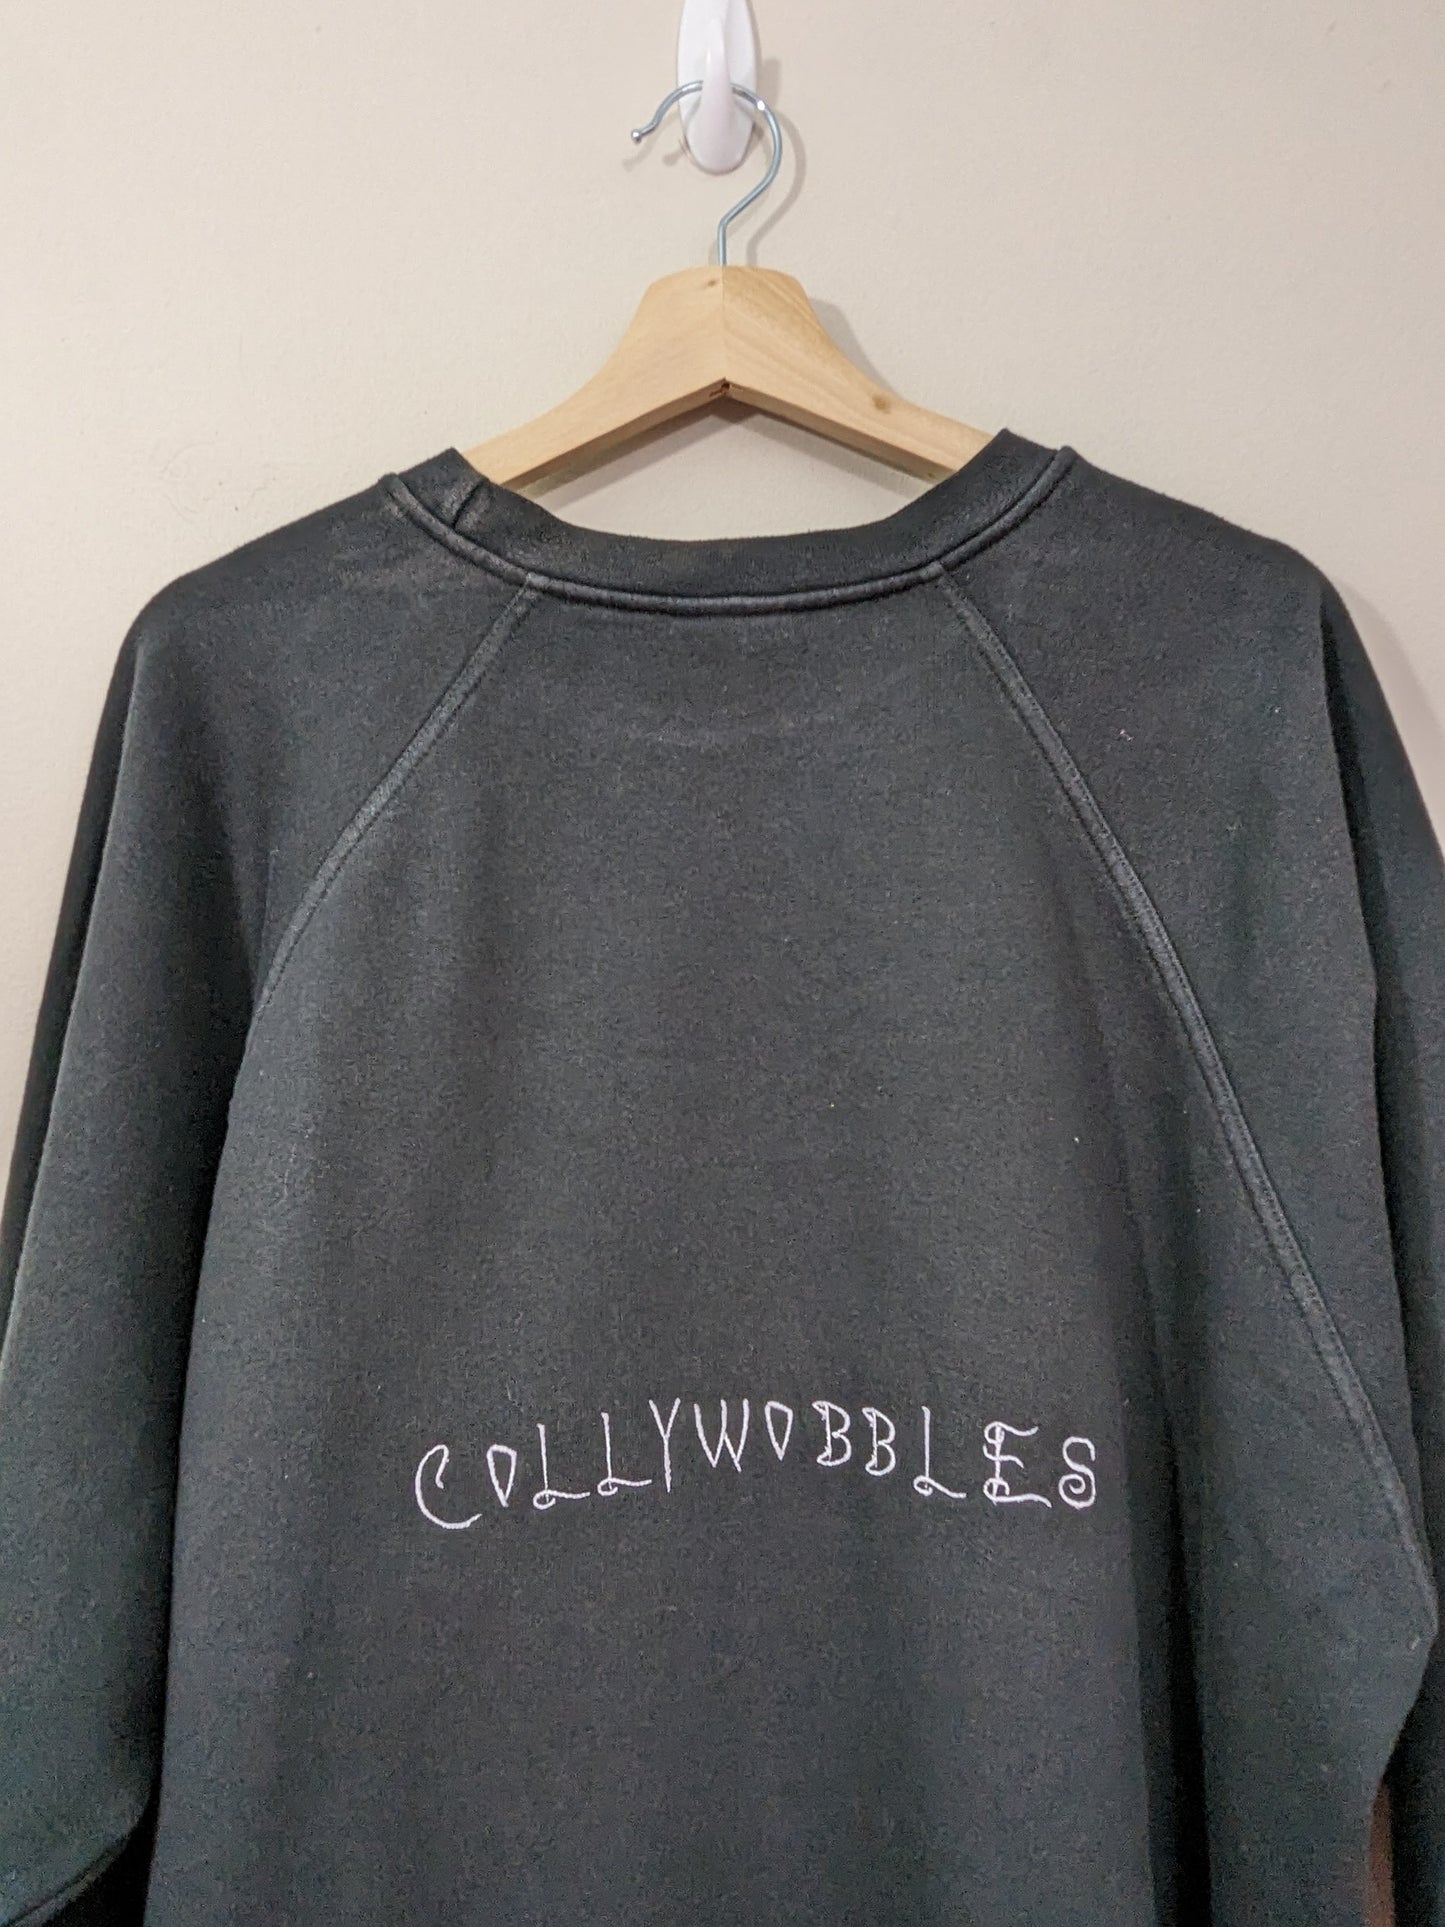 Size Large Black Reworked Sweatshirt with Embroidered Collywobbles Design on the Back